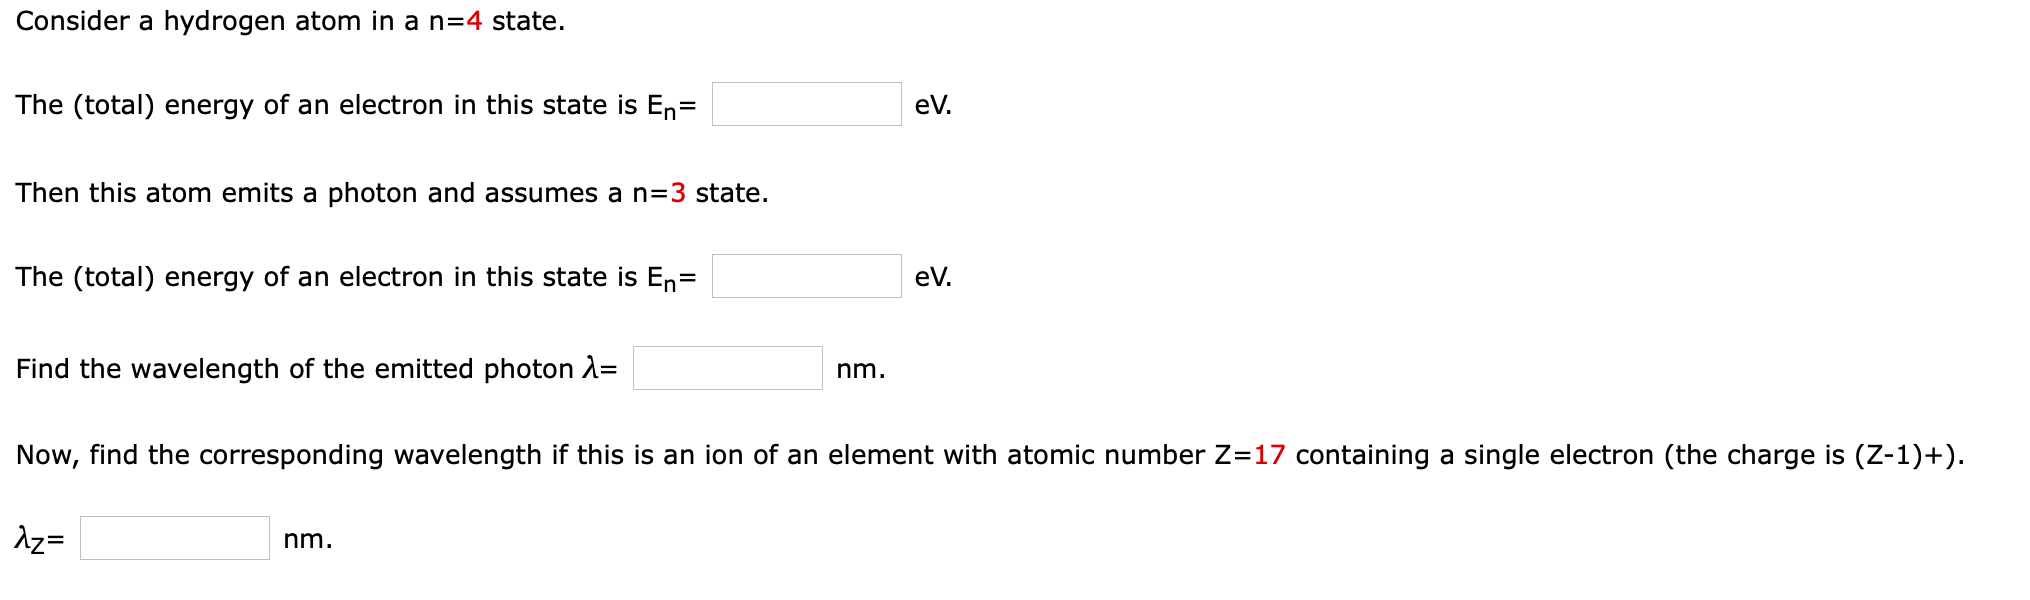 Consider a hydrogen atom in a n=4 state.
The (total) energy of an electron in this state is En=
eV.
Then this atom emits a photon and assumes a n=3 state.
The (total) energy of an electron in this state is En=
eV.
Find the wavelength of the emitted photon 2=
nm.
Now, find the corresponding wavelength if this is an ion of an element with atomic number Z=17 containing a single electron (the charge is (Z-1)+).
Az=
nm.
